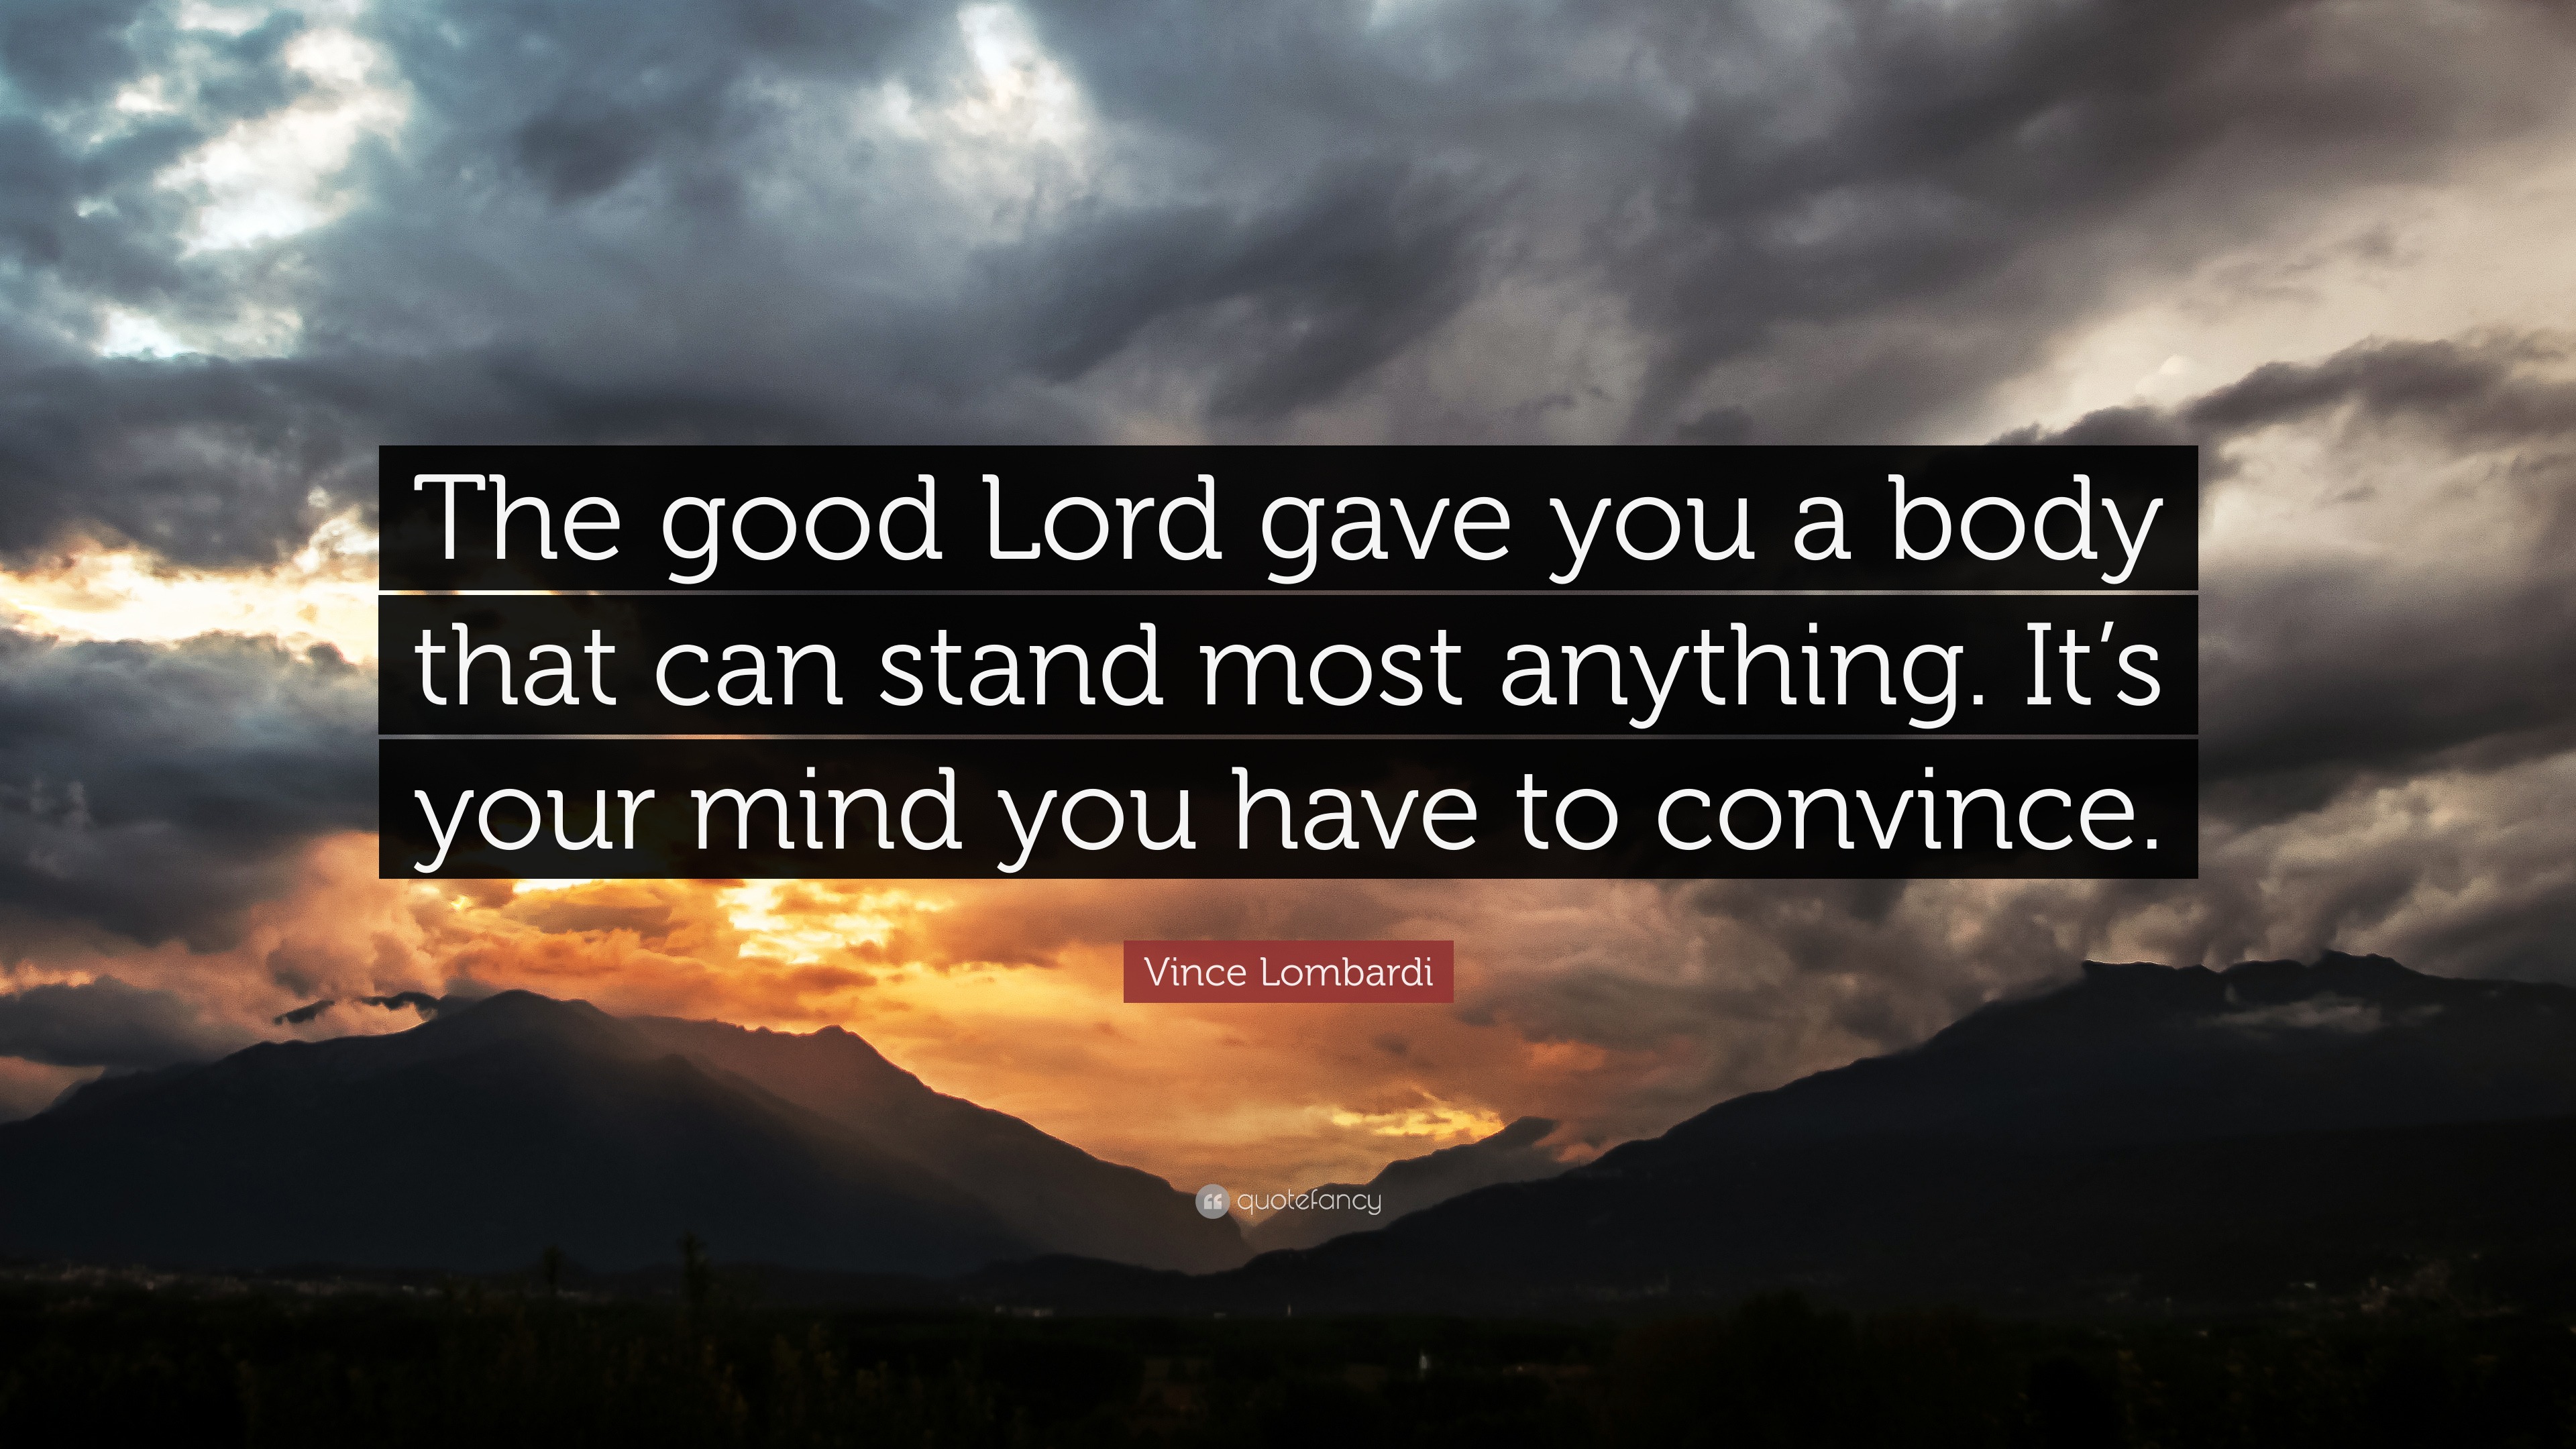 Vince Lombardi Quote: “The good Lord gave you a body that can stand